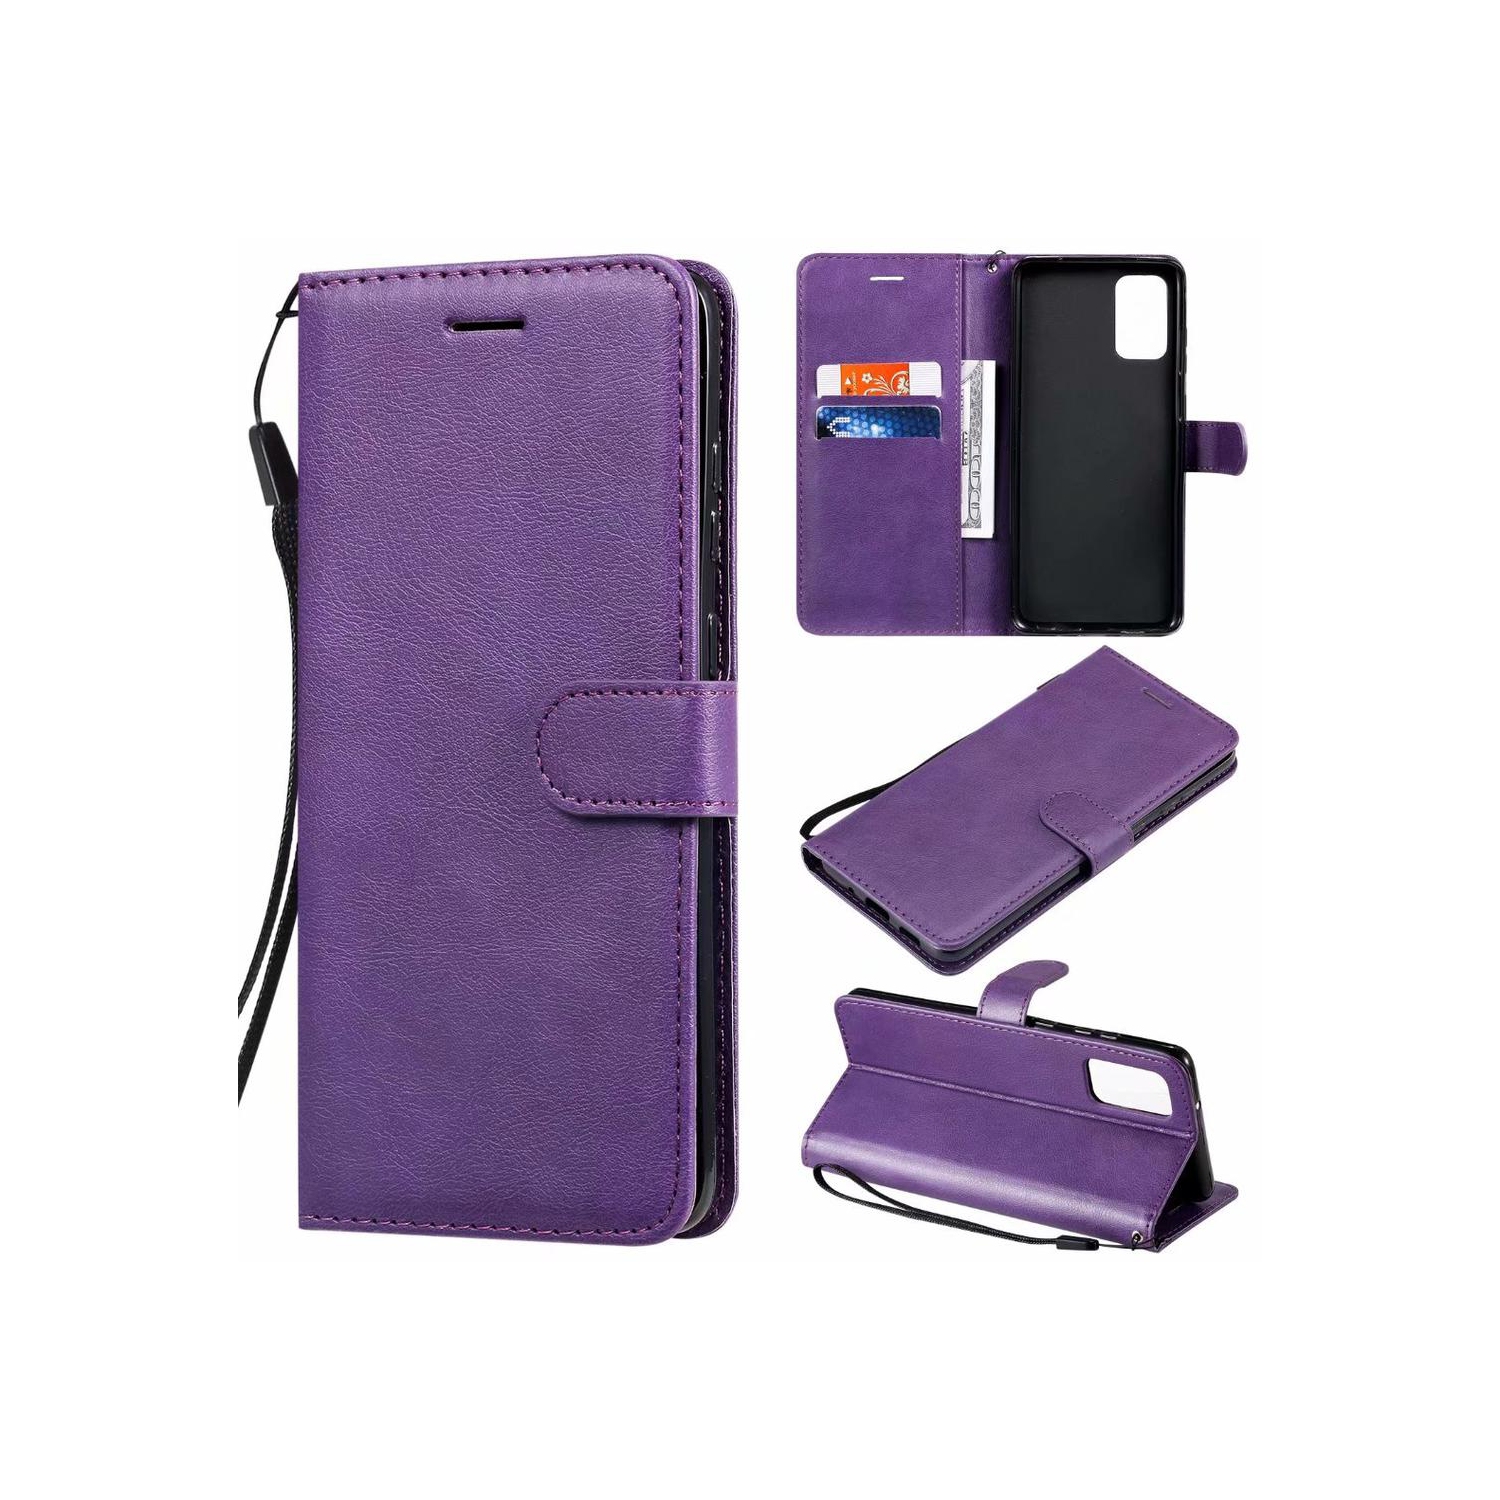 [CS] Samsung Galaxy A32 5G Case, Magnetic Leather Folio Wallet Flip Case Cover with Card Slot, Purple